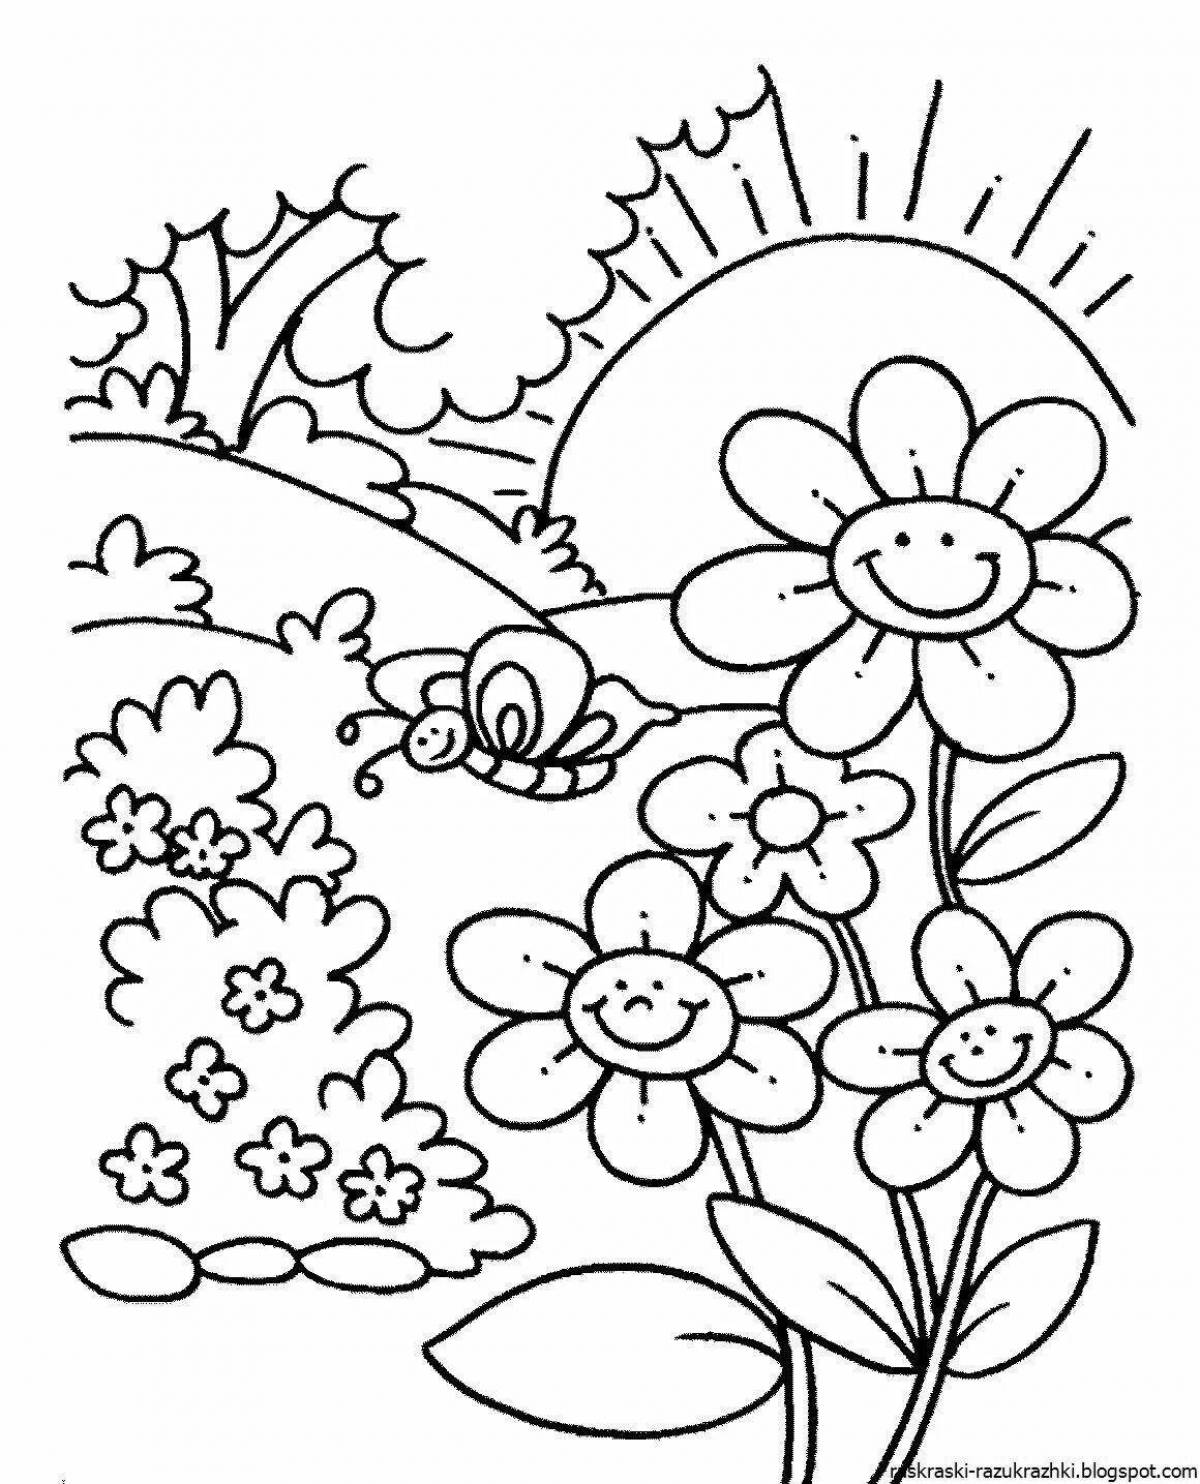 Glowing nature coloring book for children 6-7 years old